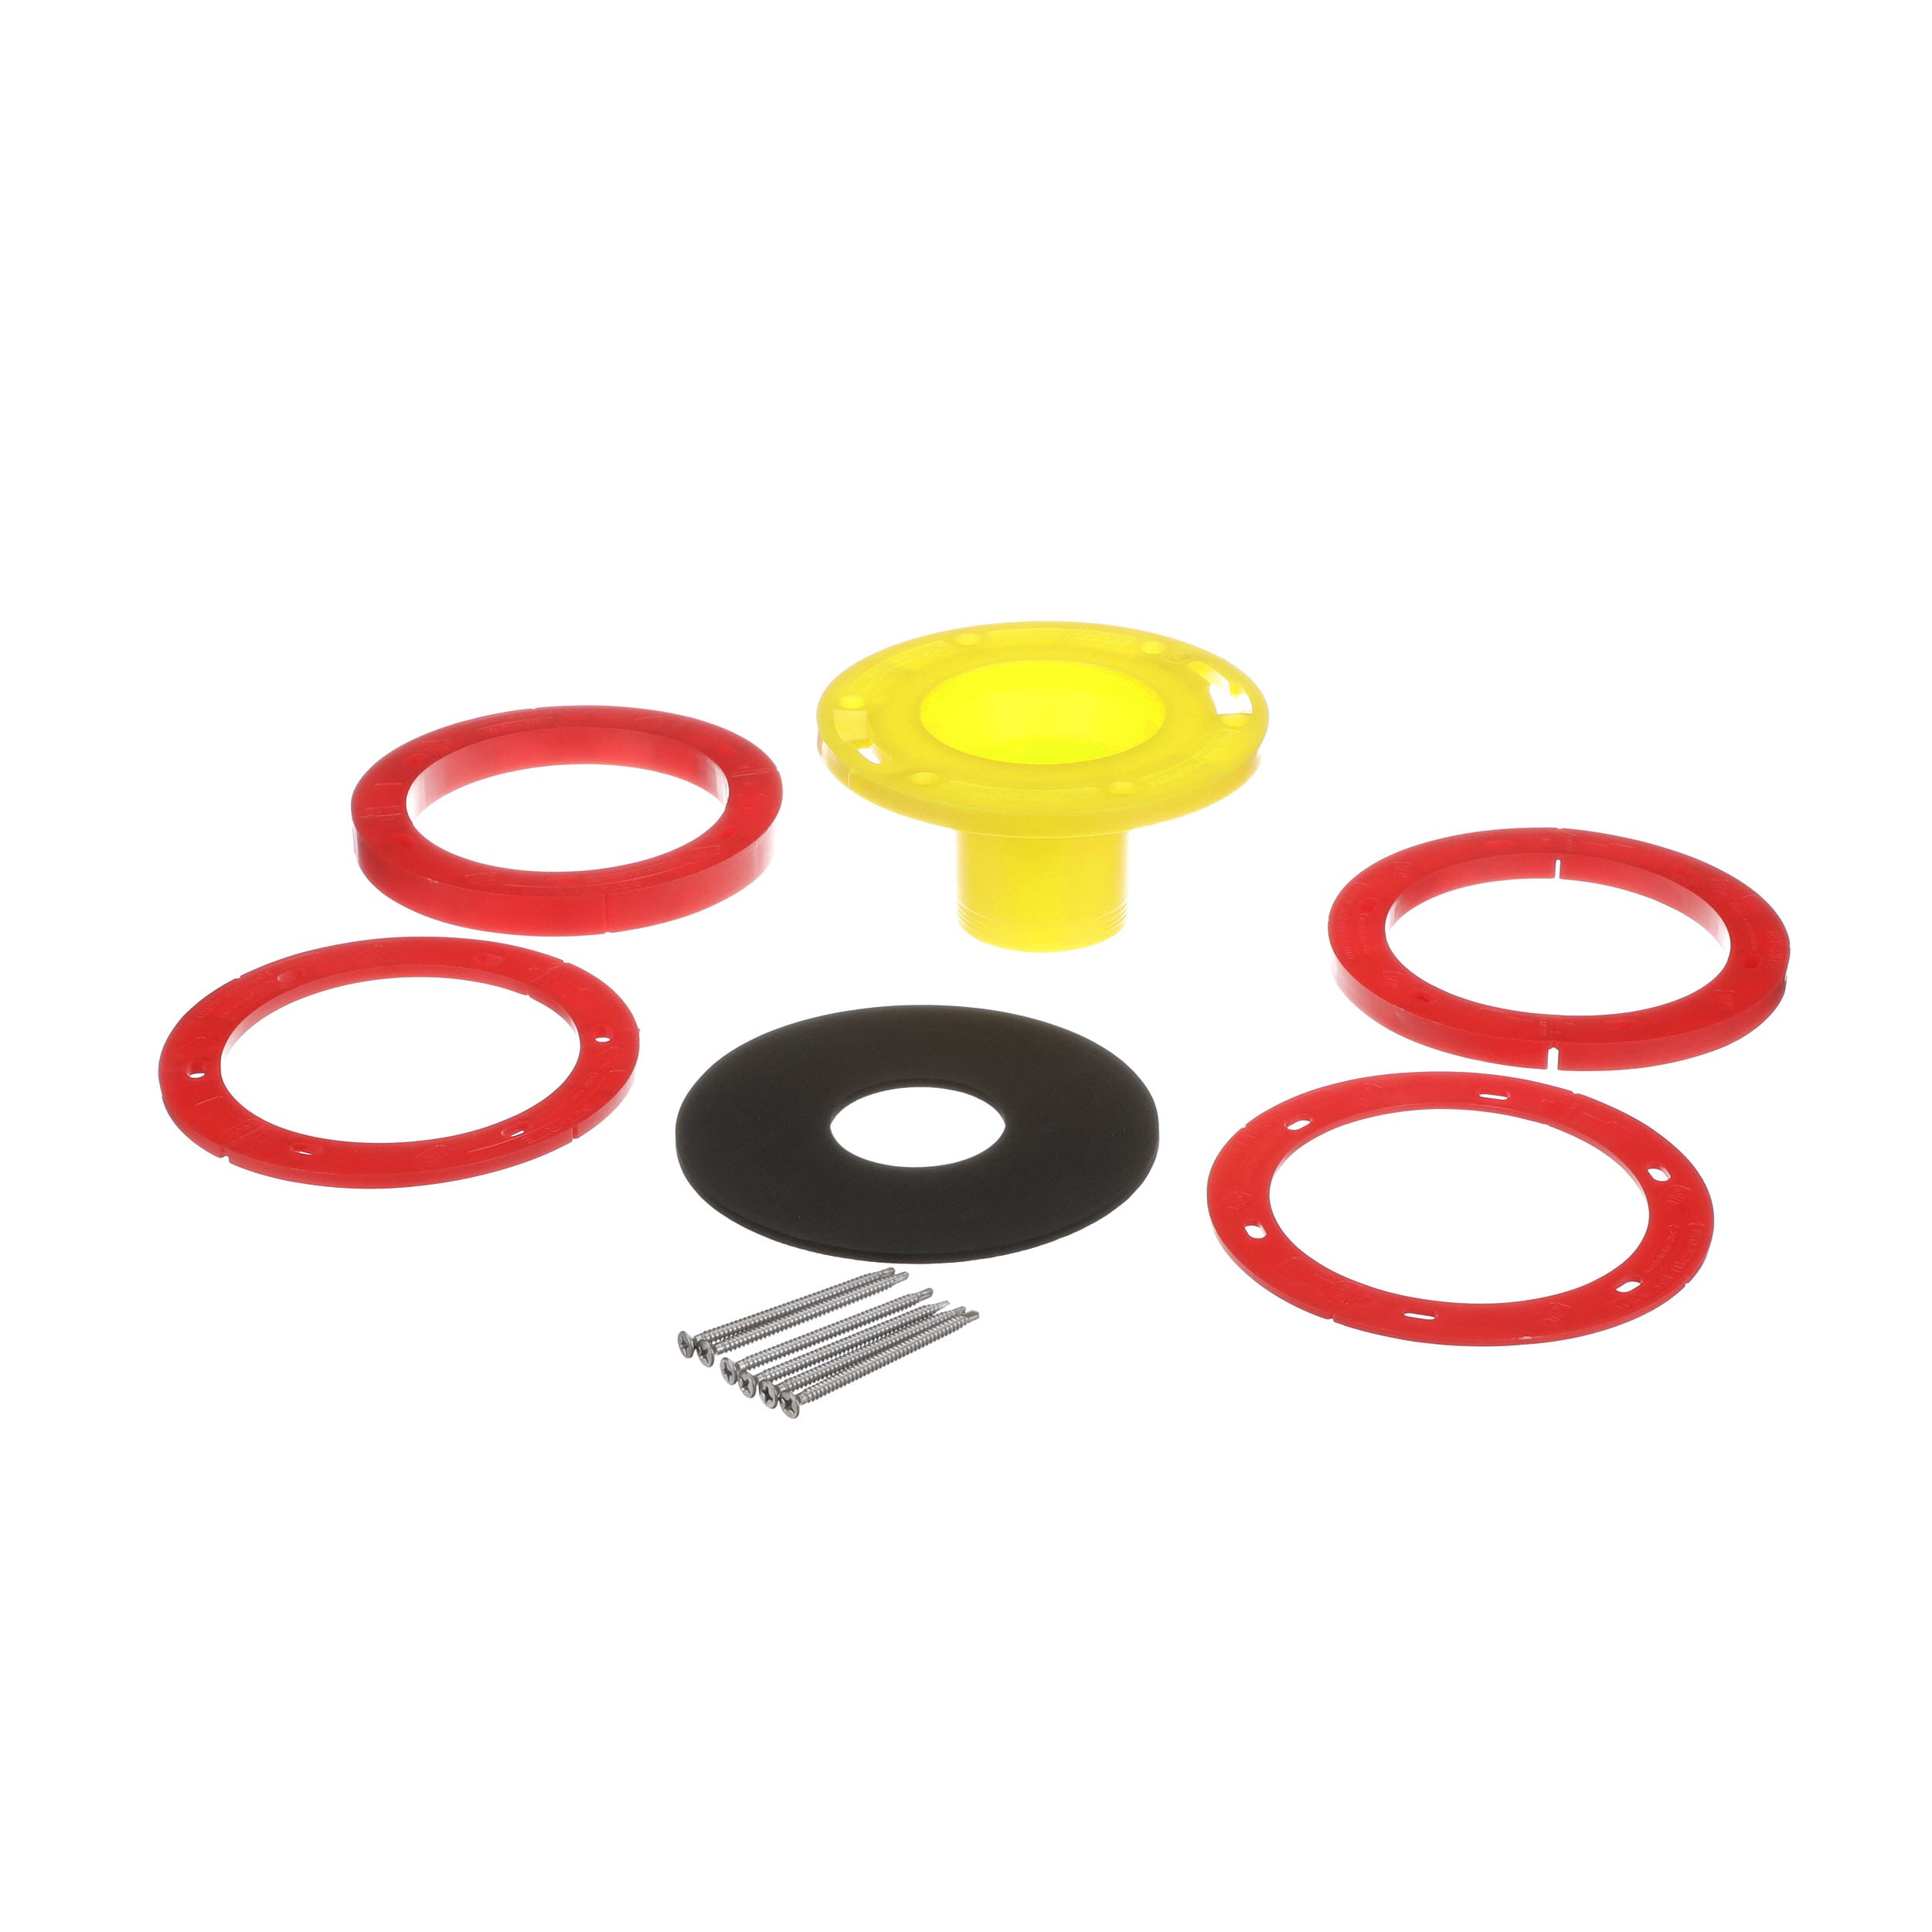 Toilet Flange Extension Kit Corrects Elevation Durable Easy To Install Layout 